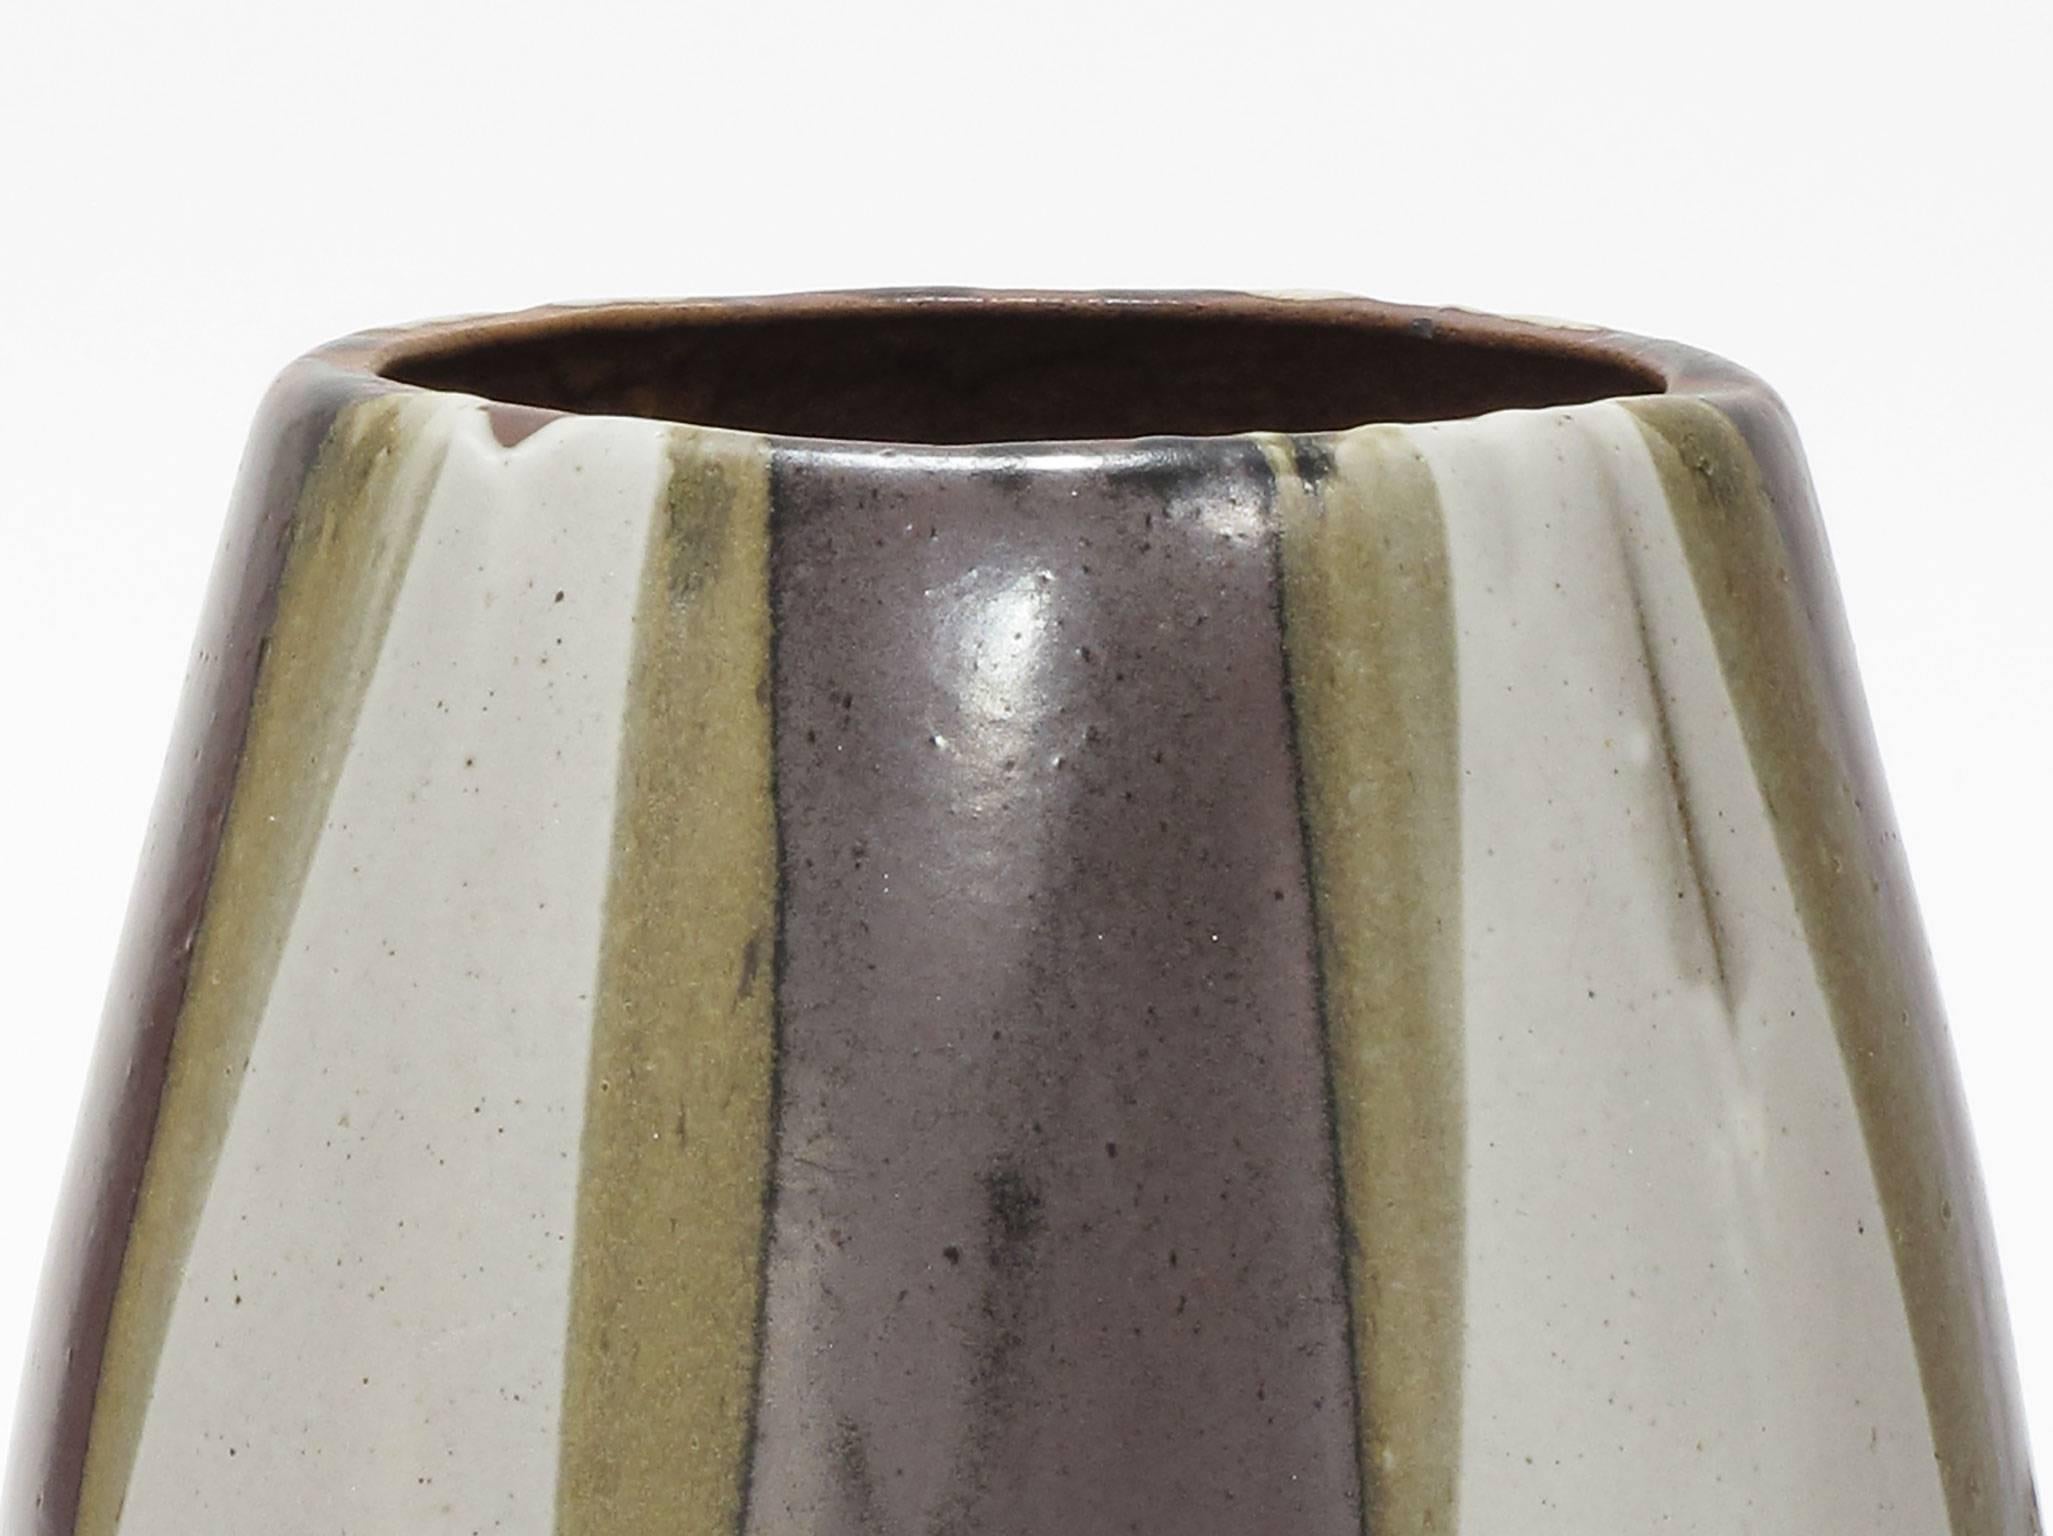 David Cressey Pro Artisan Collection 'Flame' Glaze Design Ceramic Planter, 1960s In Good Condition For Sale In Los Angeles, CA